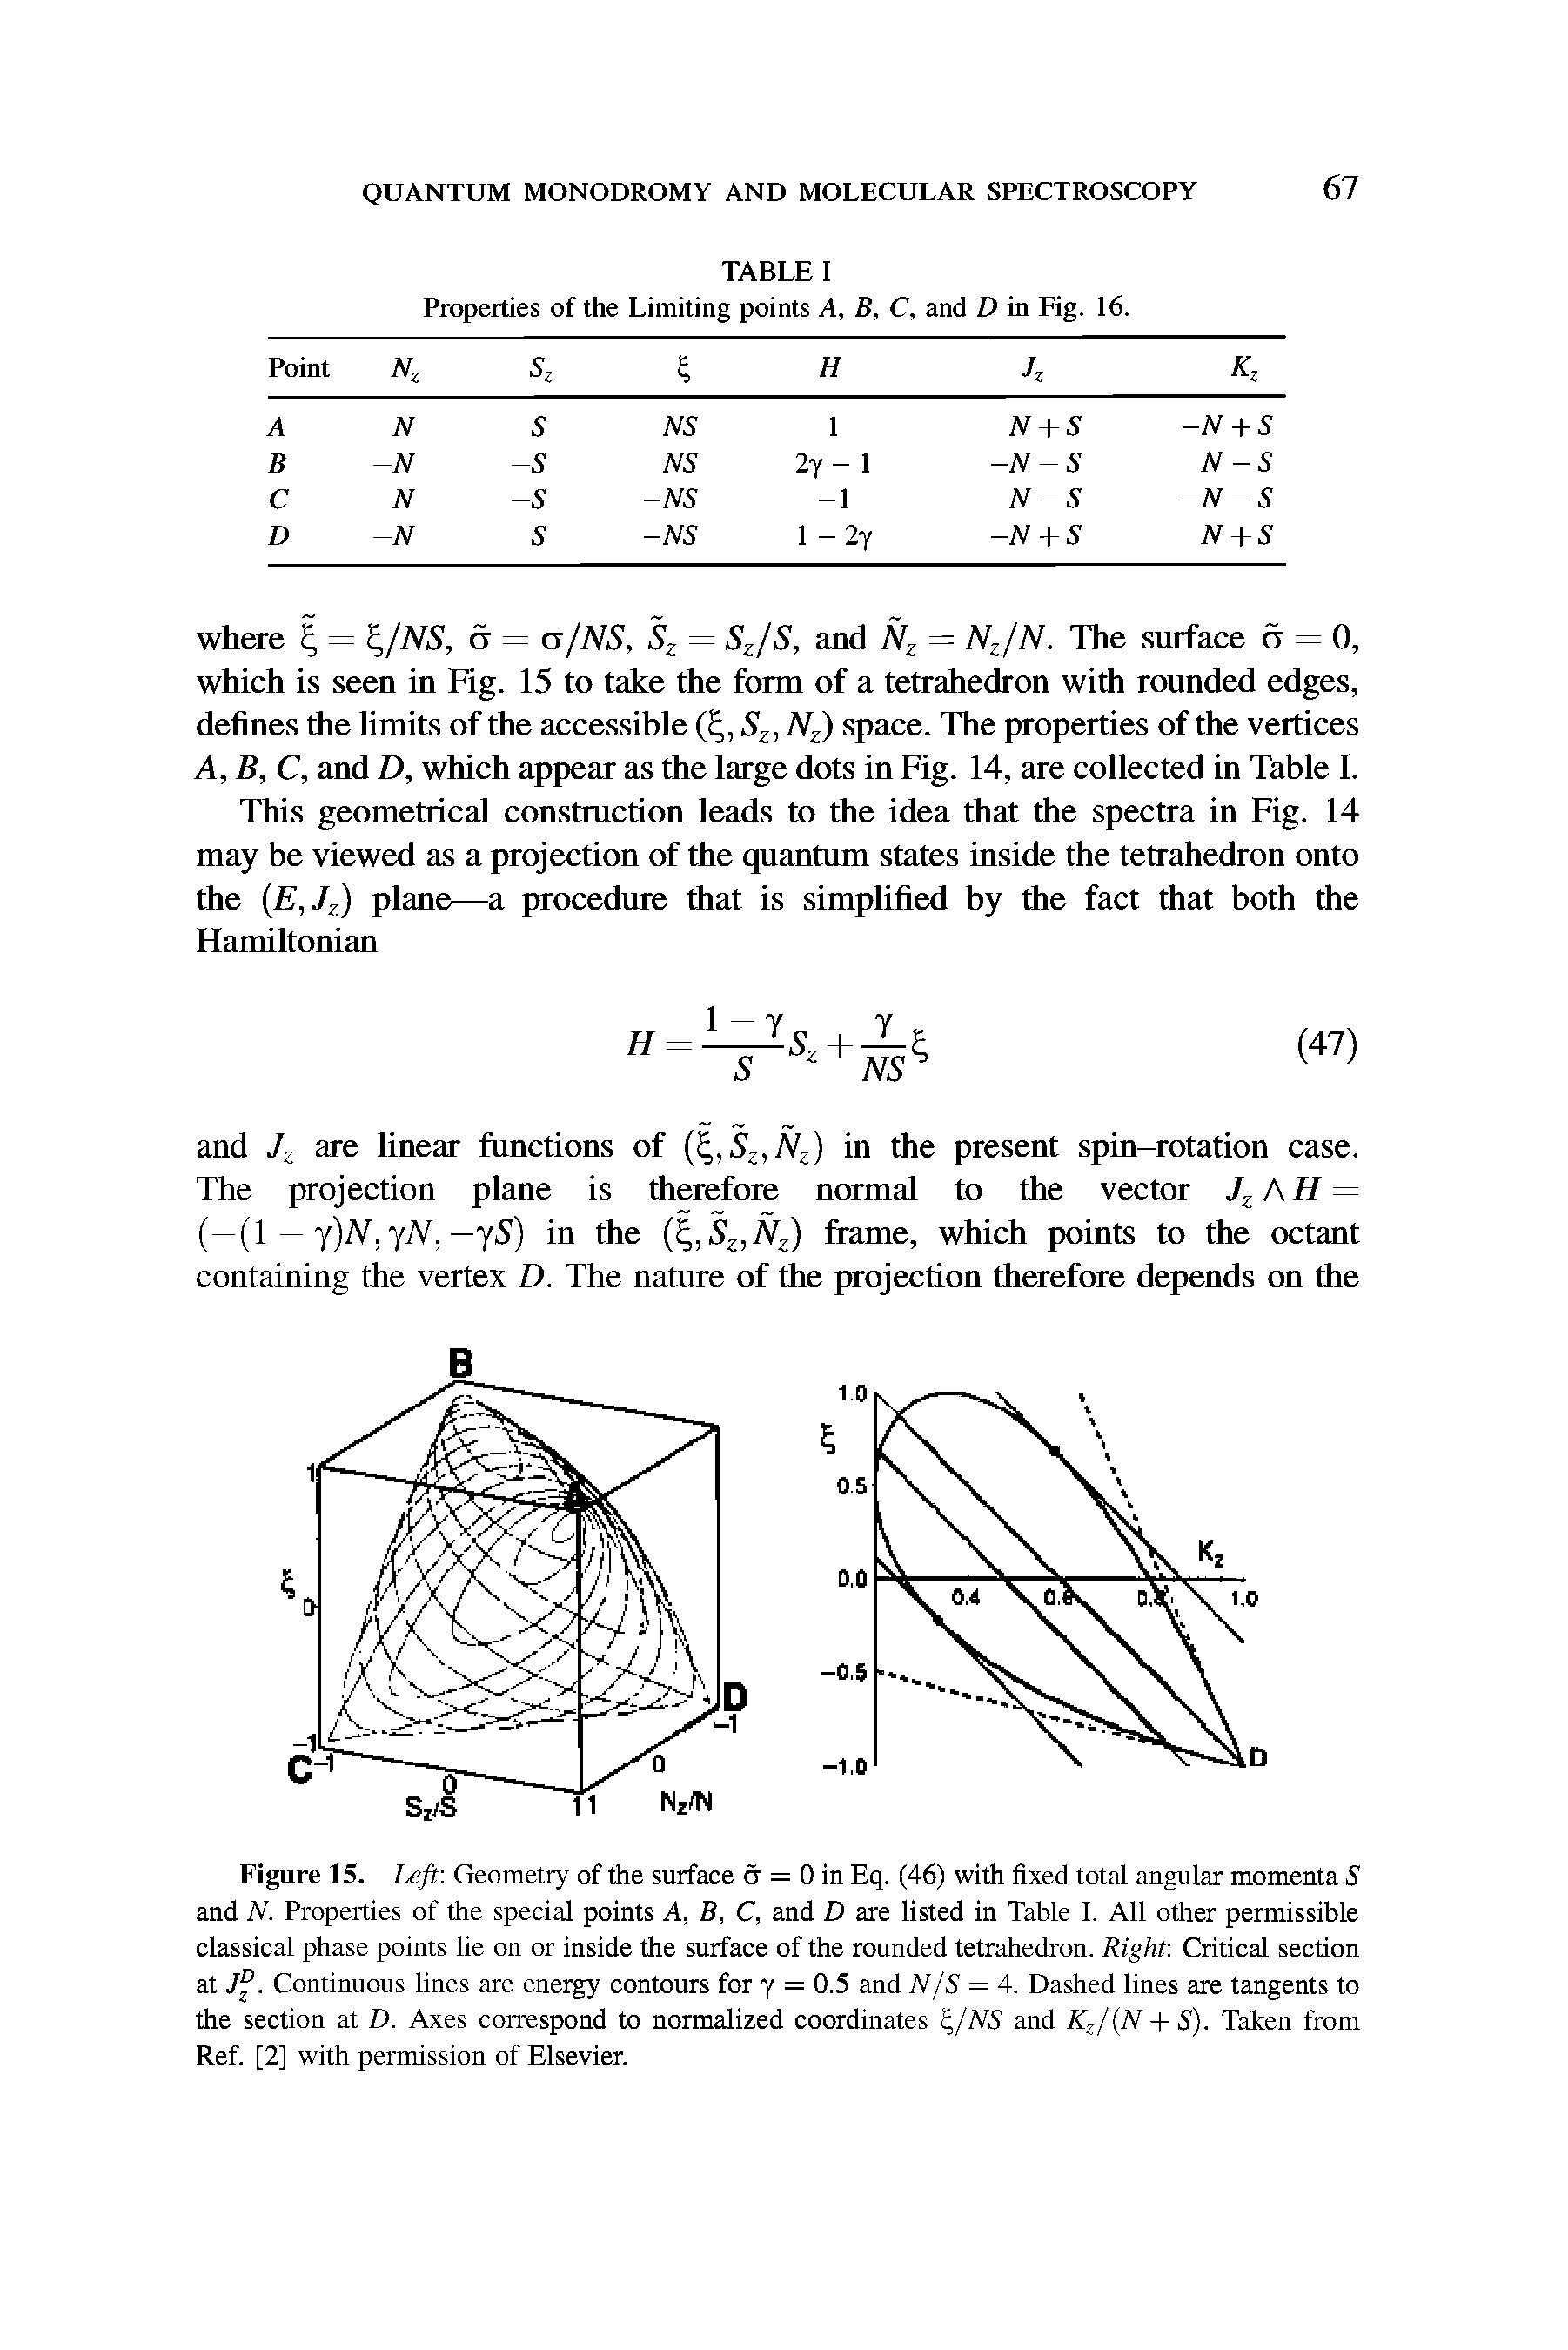 Figure 15. Left-. Geometry of the surface 6 = 0 in Eq. (46) with fixed total angular momenta S and N. Properties of the special points A, B, C, and D are listed in Table I. All other permissible classical phase points lie on or inside the surface of the rounded tetrahedron. Right. Critical section at J. Continuous lines are energy contours for y = 0.5 and N/S = 4. Dashed lines are tangents to the section at D. Axes correspond to normalized coordinates, /NS and K JiN + S). Taken from Ref. [2] with permission of Elsevier.